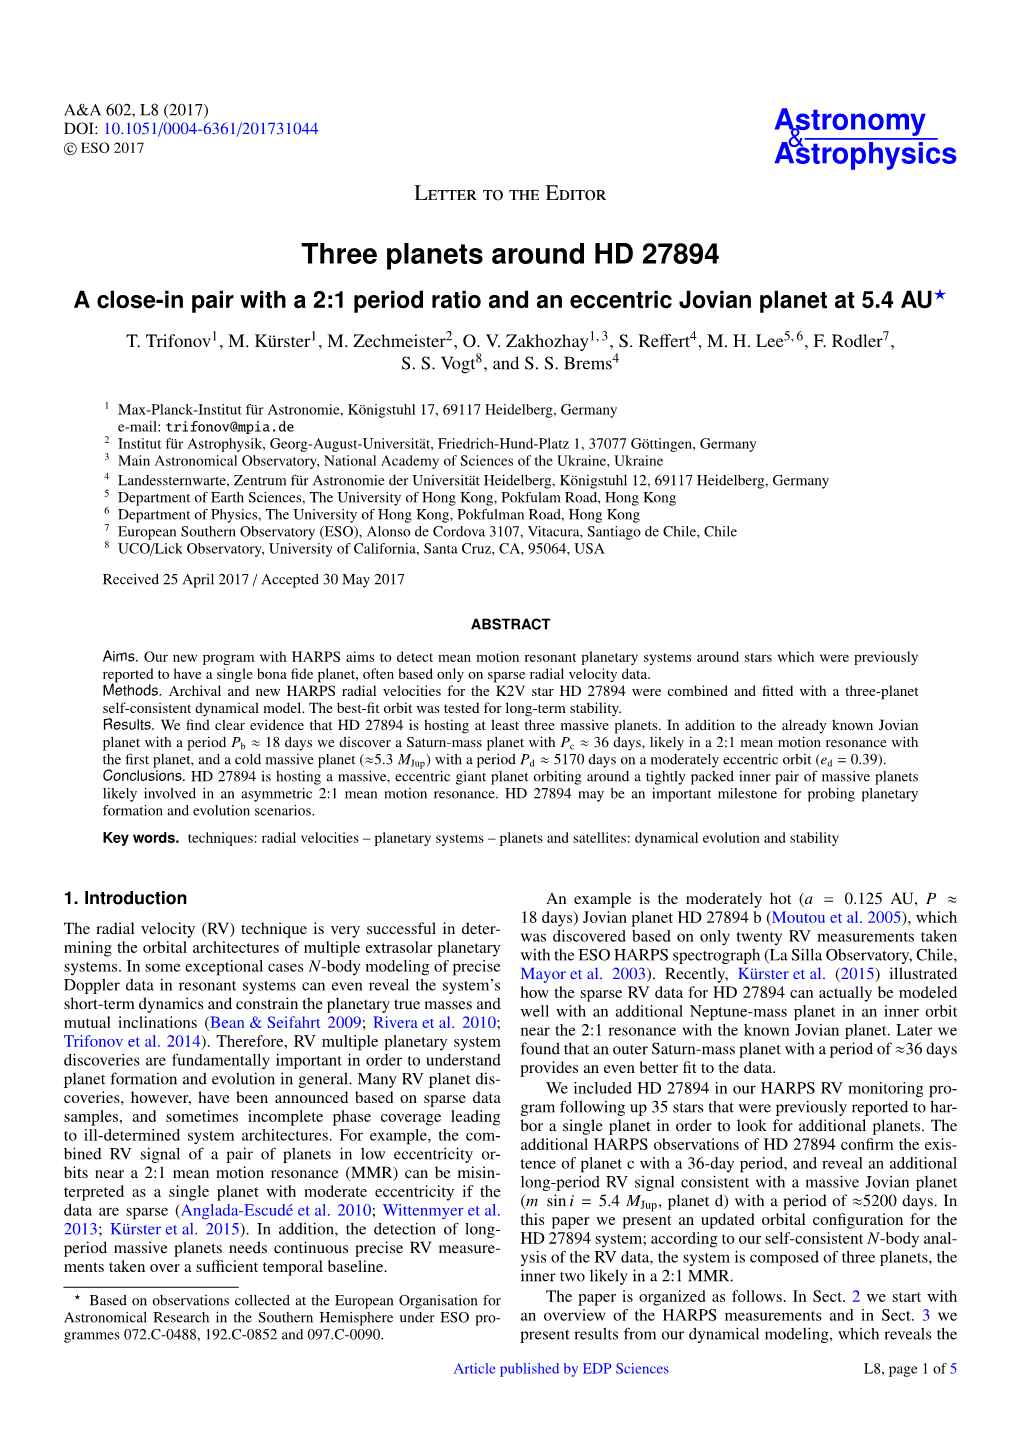 Three Planets Around HD 27894 a Close-In Pair with a 2:1 Period Ratio and an Eccentric Jovian Planet at 5.4 AU?